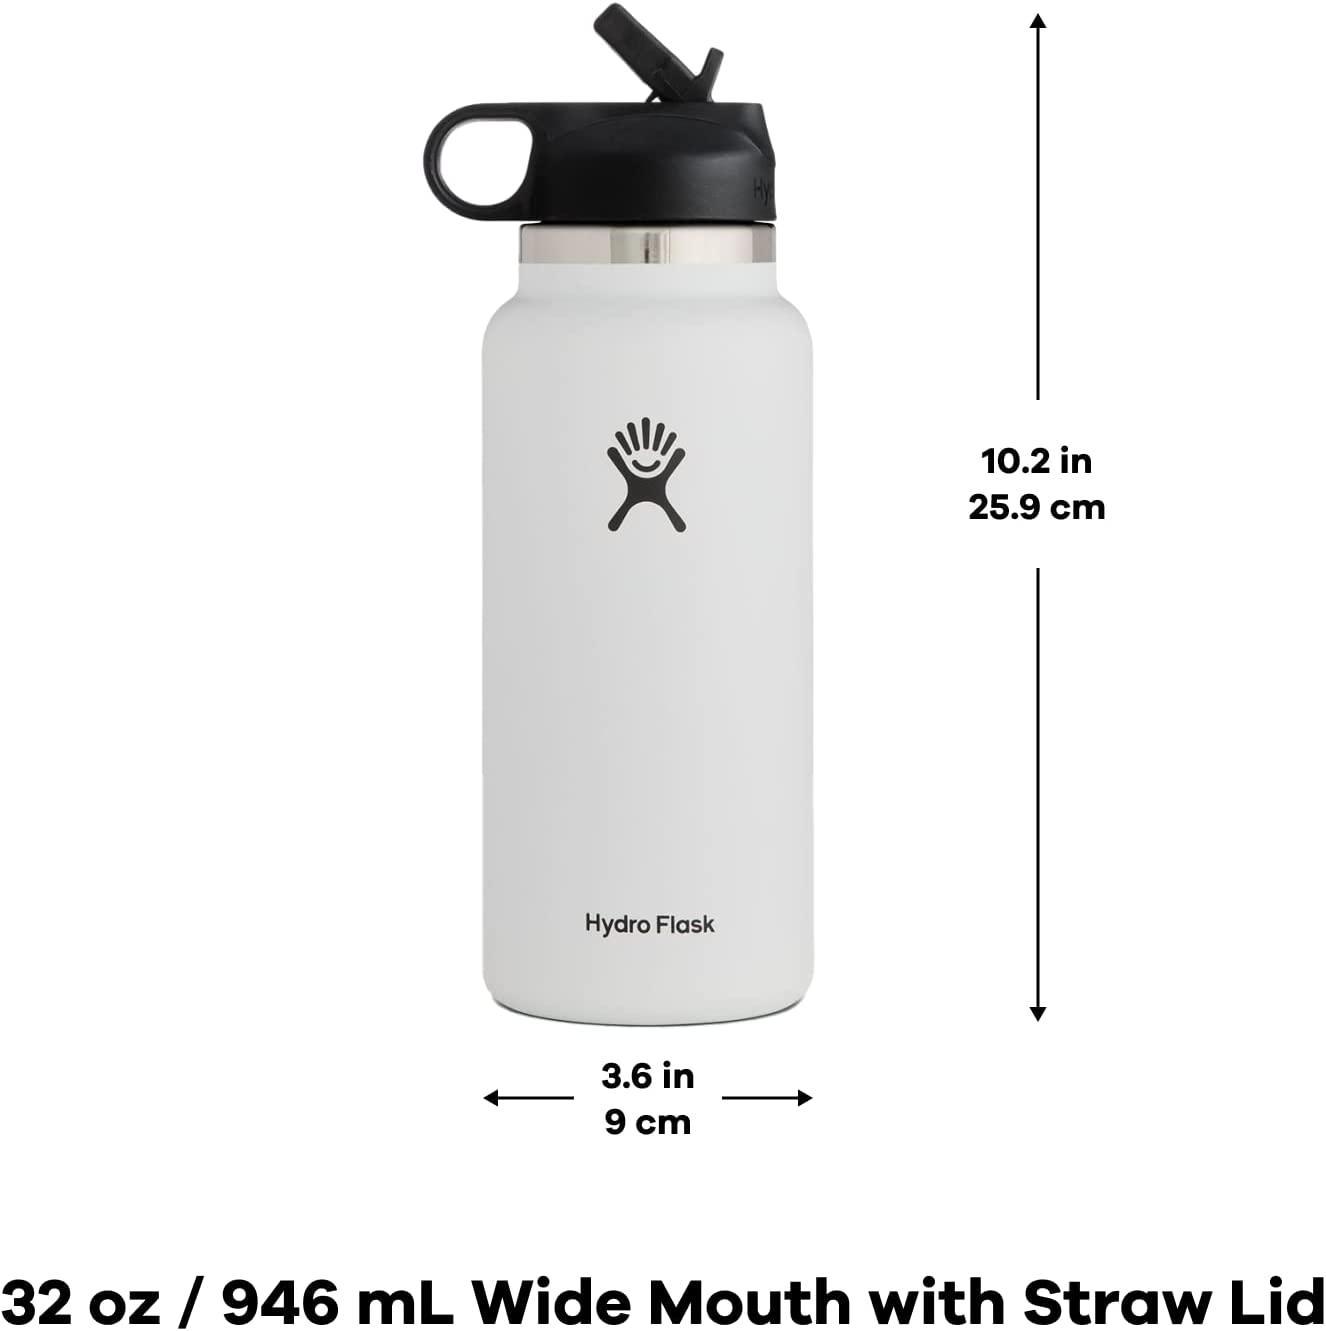 Hydro Flask Vacuum Insulated Stainless Steel Water Bottle Wide Mouth with Straw